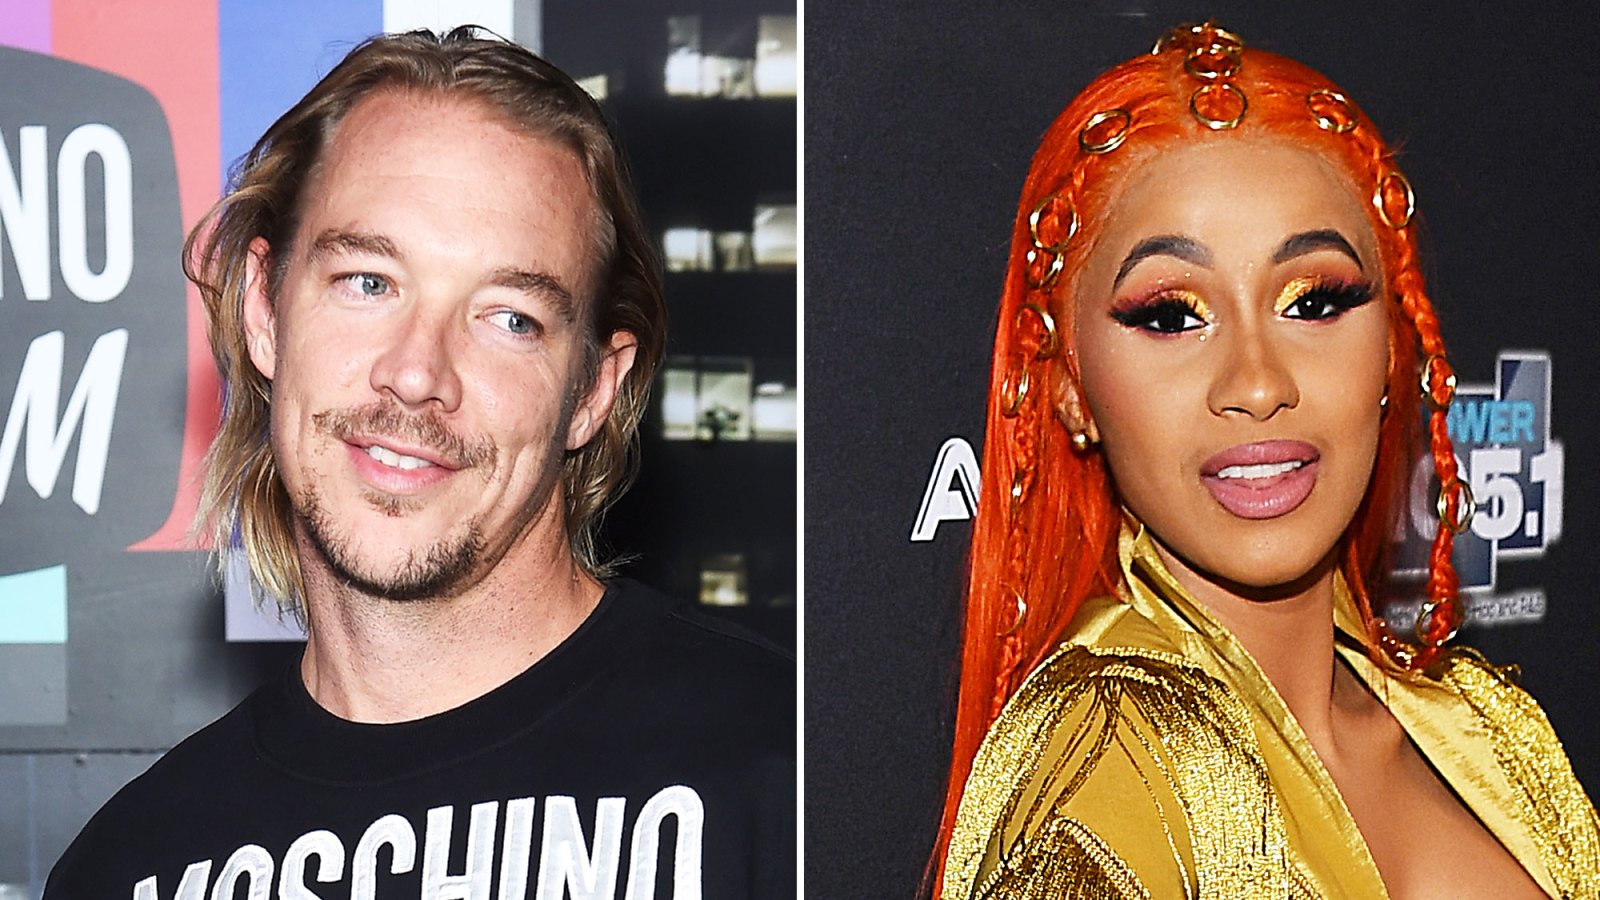 Diplo Leaves a Flirty Comment on Cardi B’s Instagram After Her Split From Husband Offset